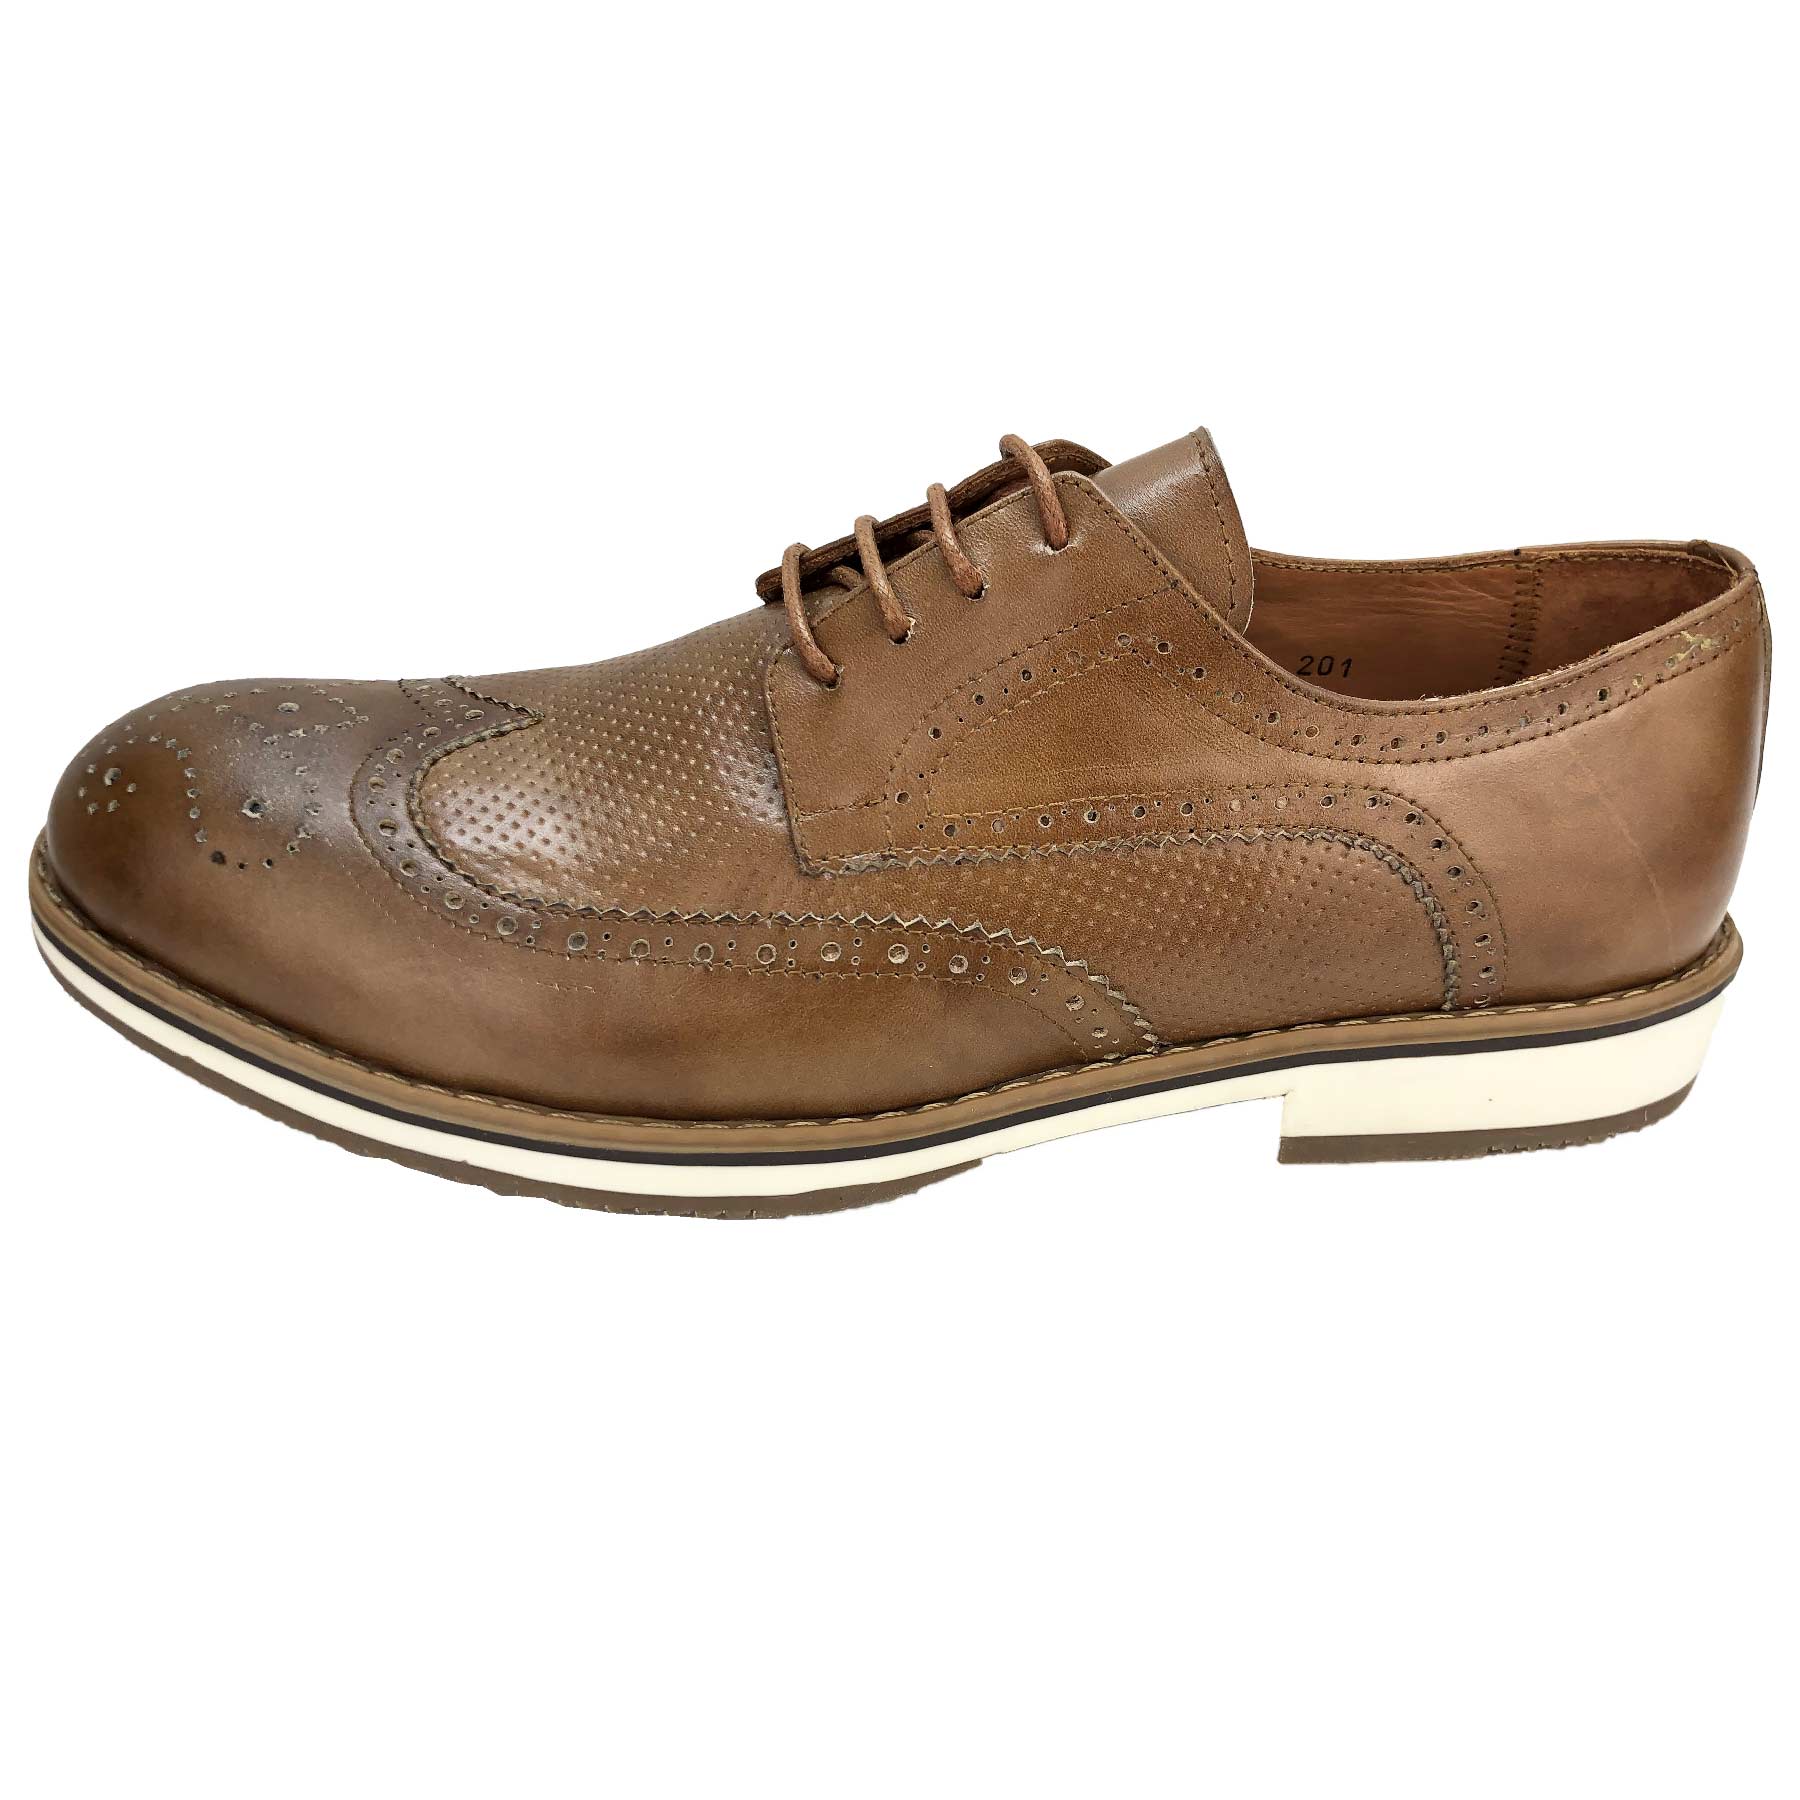 CH201-020 Chaussure Cuir Taba - deluxe-maroc